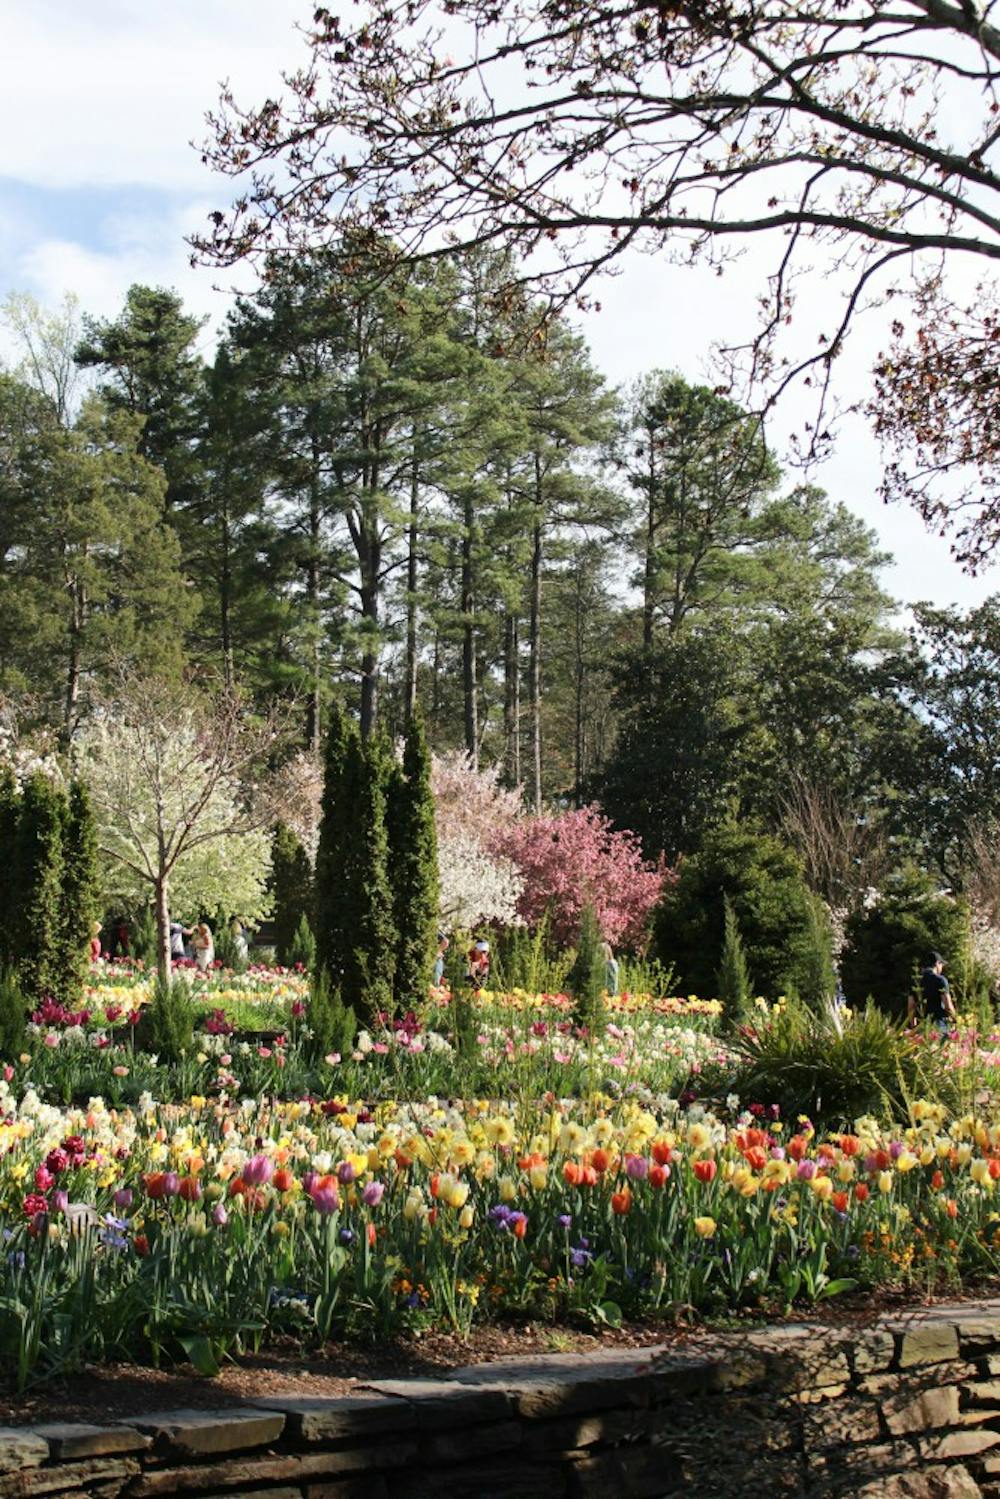 Visitors to the gardens enjoy a colorful view.